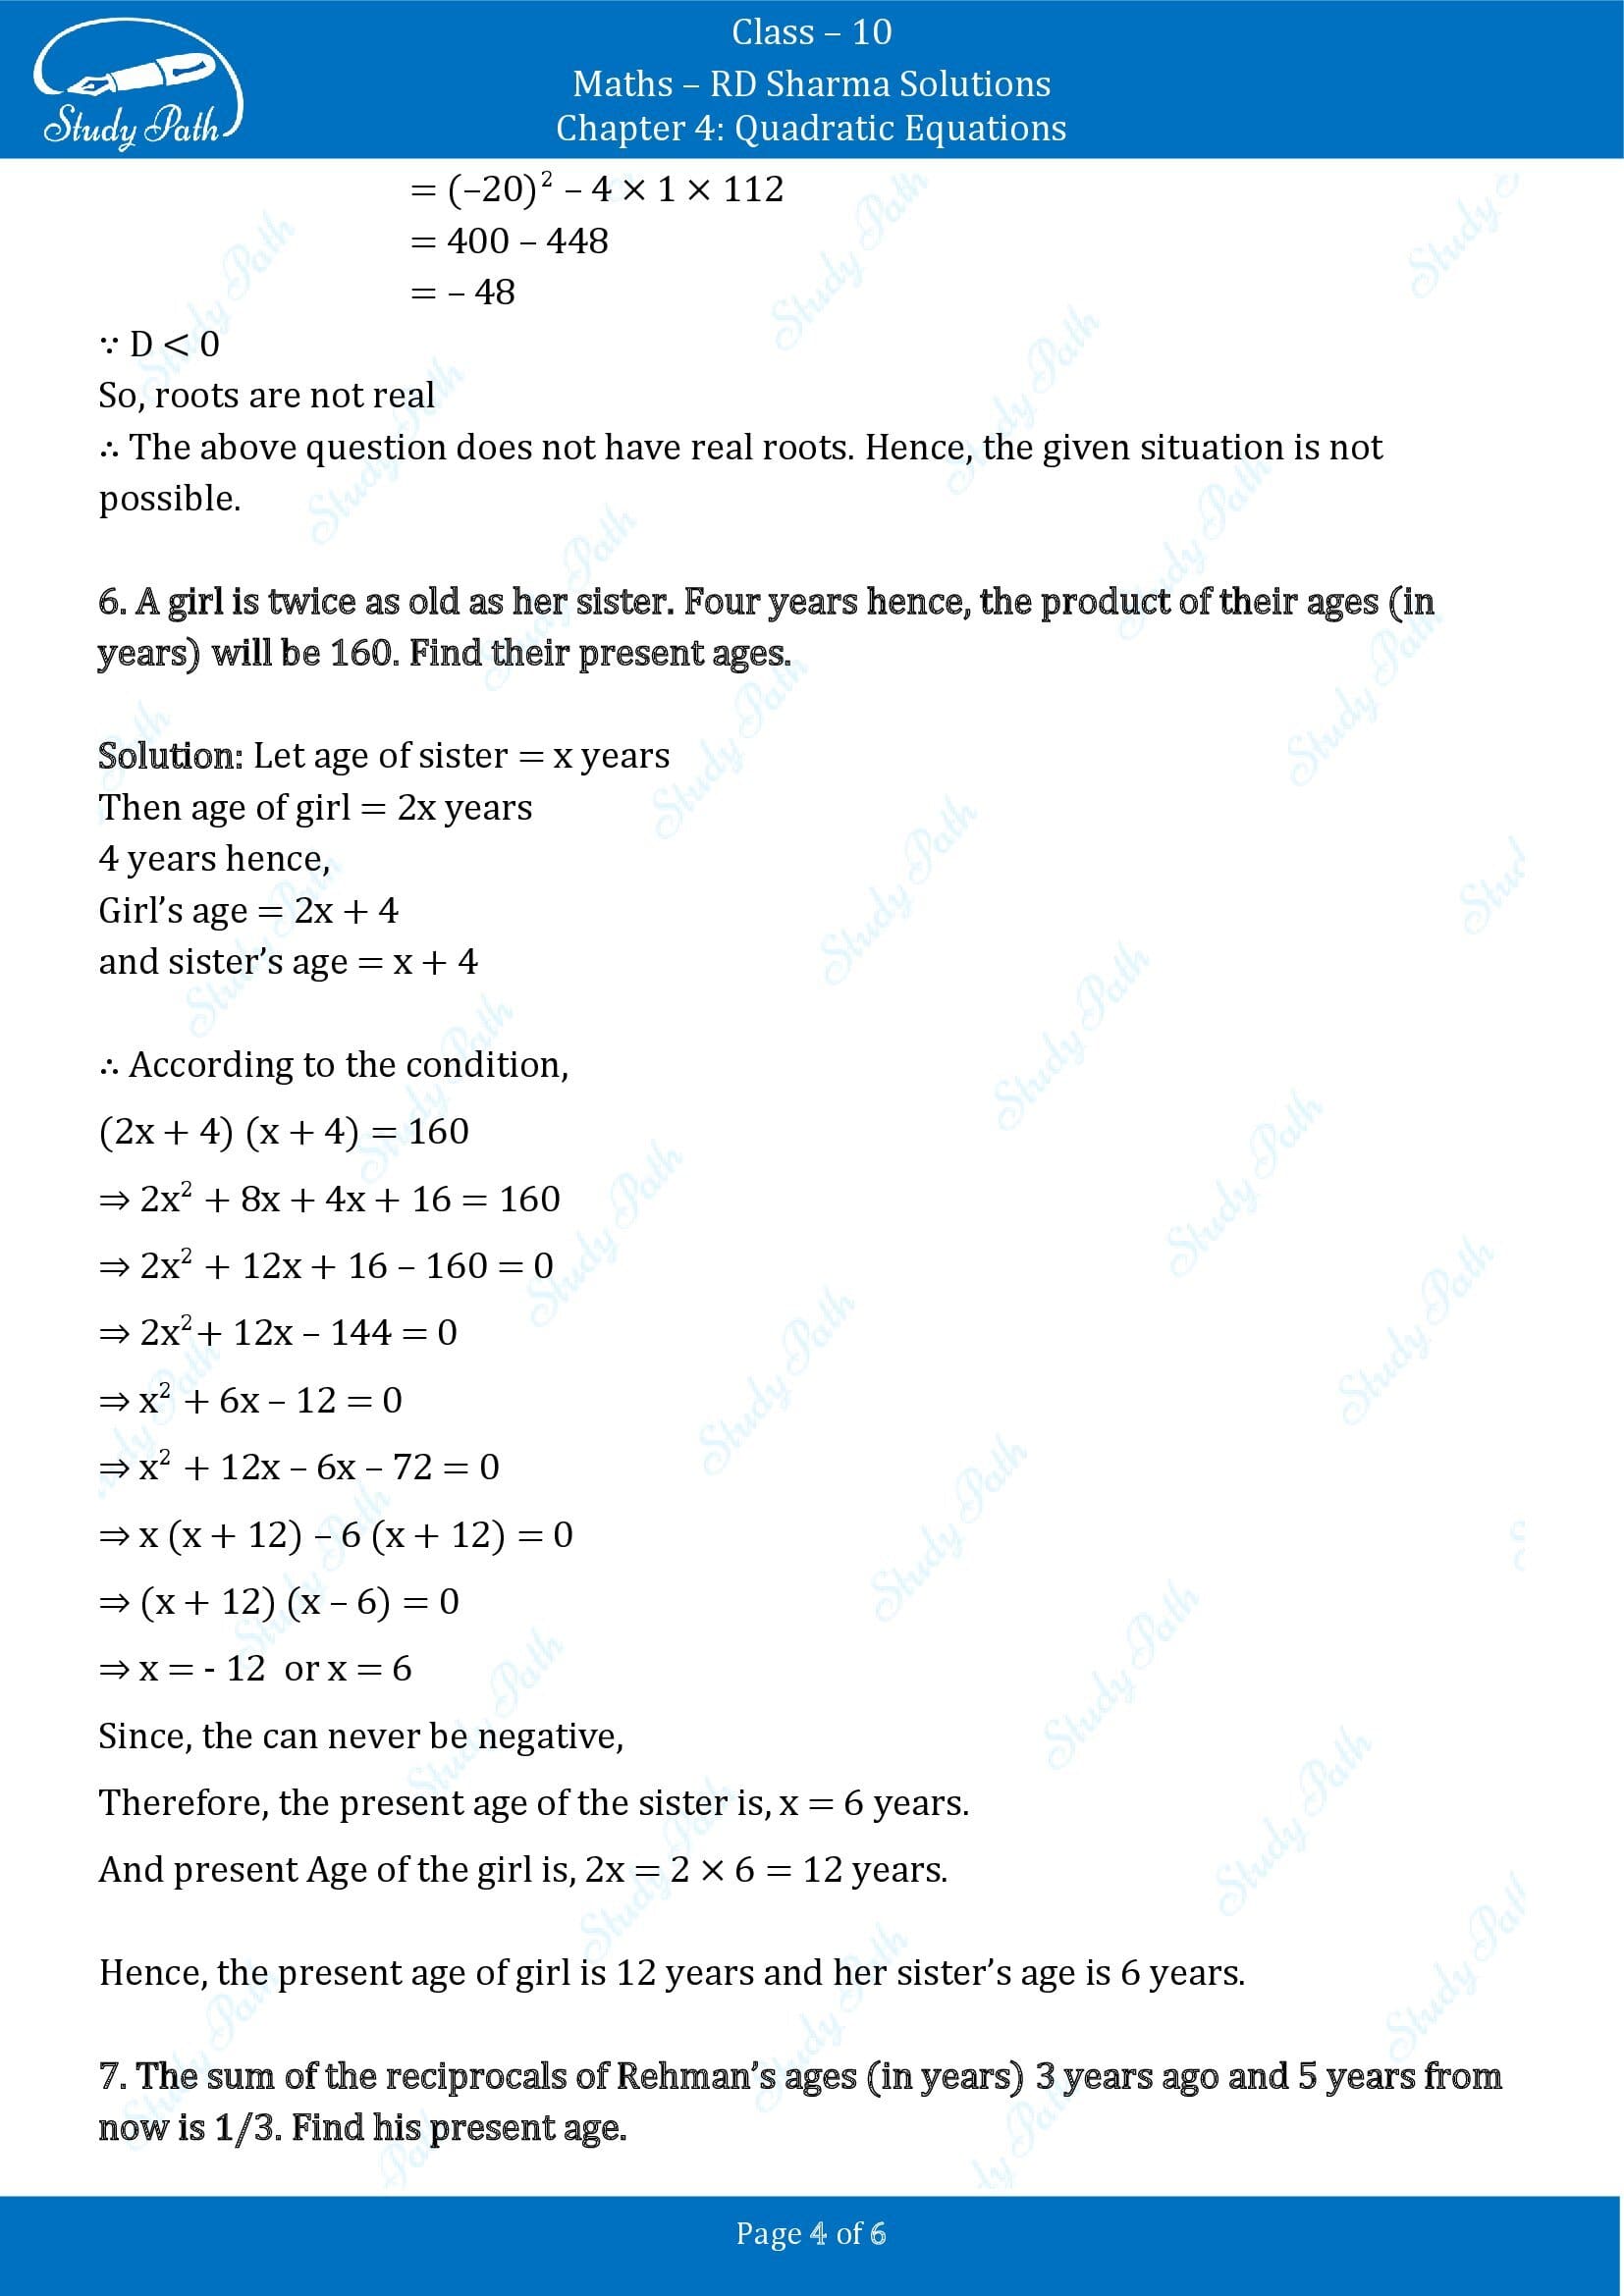 RD Sharma Solutions Class 10 Chapter 4 Quadratic Equations Exercise 4.9 00004